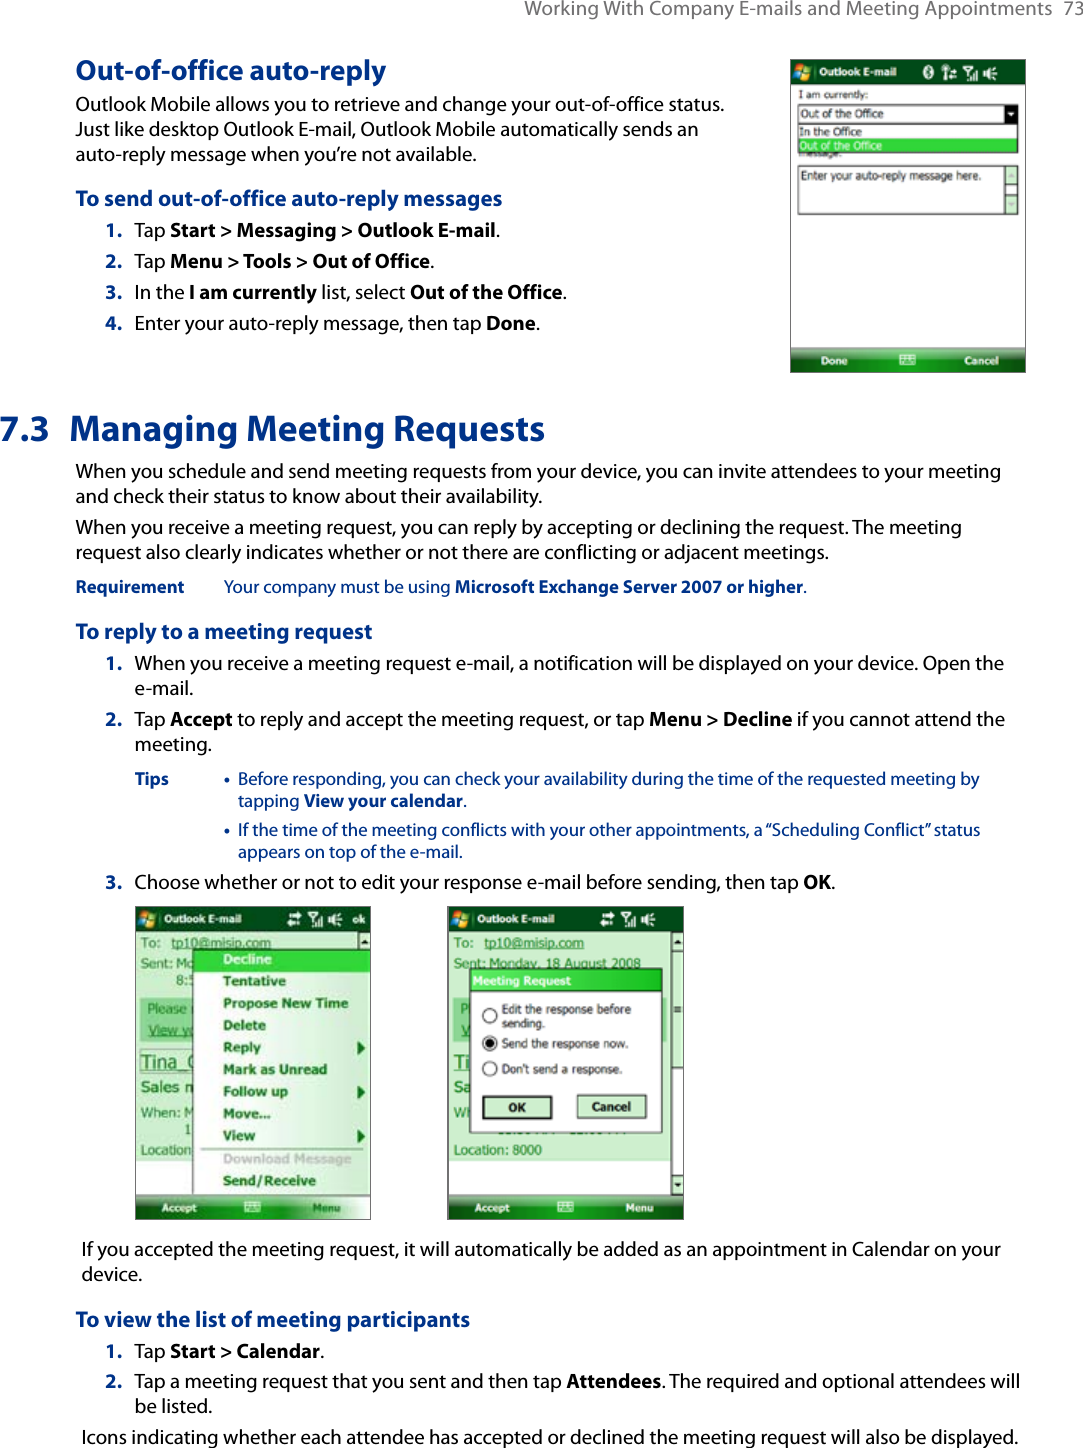 Working With Company E-mails and Meeting Appointments  73Out-of-office auto-replyOutlook Mobile allows you to retrieve and change your out-of-office status. Just like desktop Outlook E-mail, Outlook Mobile automatically sends an auto-reply message when you’re not available.To send out-of-office auto-reply messages1.   Tap Start &gt; Messaging &gt; Outlook E-mail.2.  Tap Menu &gt; Tools &gt; Out of Office.3.  In the I am currently list, select Out of the Office.4.  Enter your auto-reply message, then tap Done.7.3  Managing Meeting RequestsWhen you schedule and send meeting requests from your device, you can invite attendees to your meeting and check their status to know about their availability.When you receive a meeting request, you can reply by accepting or declining the request. The meeting request also clearly indicates whether or not there are conflicting or adjacent meetings.Requirement   Your company must be using Microsoft Exchange Server 2007 or higher.To reply to a meeting request1.  When you receive a meeting request e-mail, a notification will be displayed on your device. Open the e-mail.2.  Tap Accept to reply and accept the meeting request, or tap Menu &gt; Decline if you cannot attend the meeting.  Tips •   Before responding, you can check your availability during the time of the requested meeting by tapping View your calendar.      •   If the time of the meeting conflicts with your other appointments, a “Scheduling Conflict” status appears on top of the e-mail.3.  Choose whether or not to edit your response e-mail before sending, then tap OK. If you accepted the meeting request, it will automatically be added as an appointment in Calendar on your device.To view the list of meeting participants1.  Tap Start &gt; Calendar.2.  Tap a meeting request that you sent and then tap Attendees. The required and optional attendees will be listed.Icons indicating whether each attendee has accepted or declined the meeting request will also be displayed.